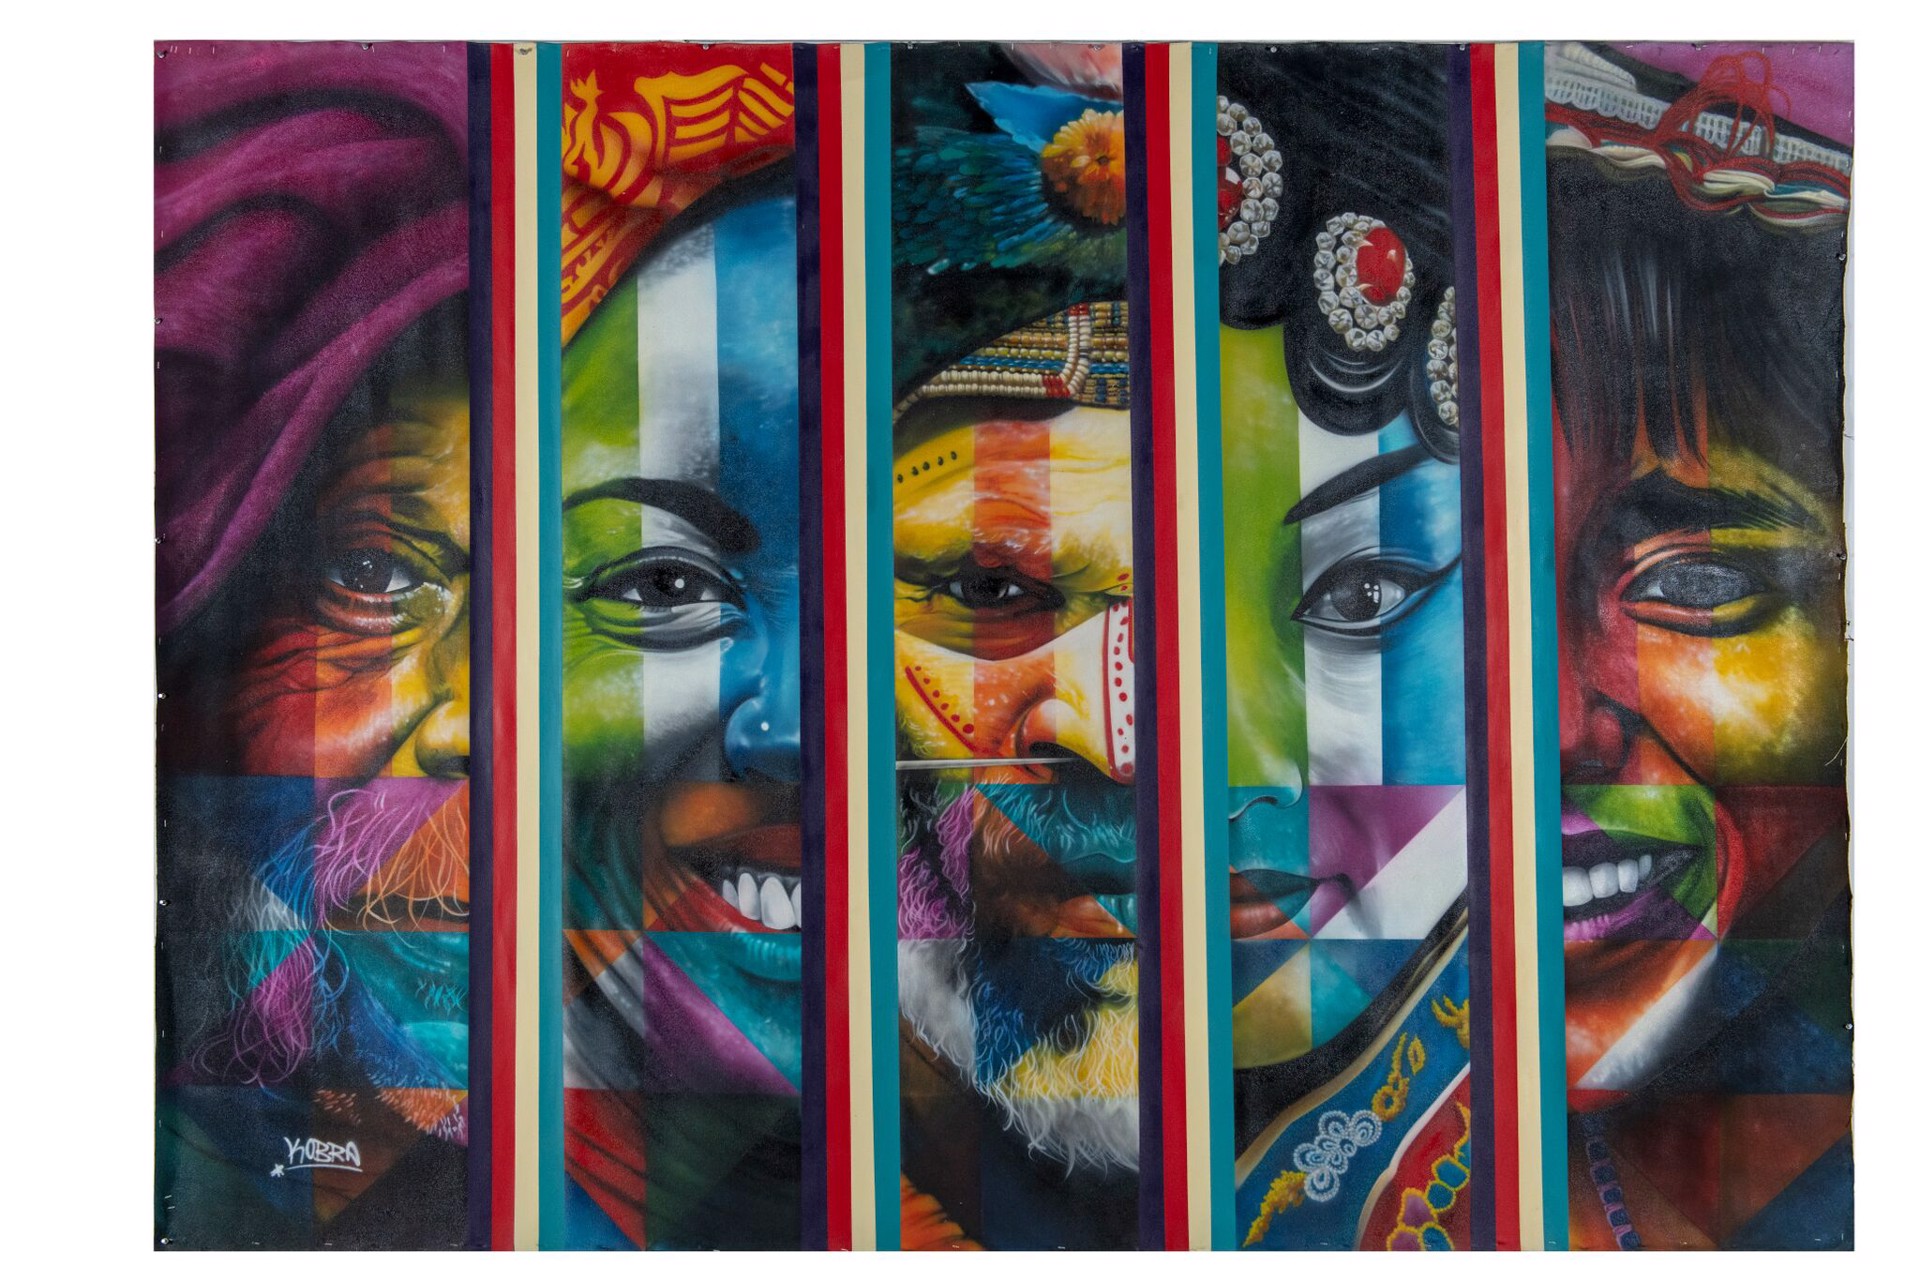 Peace Between Nations by Kobra